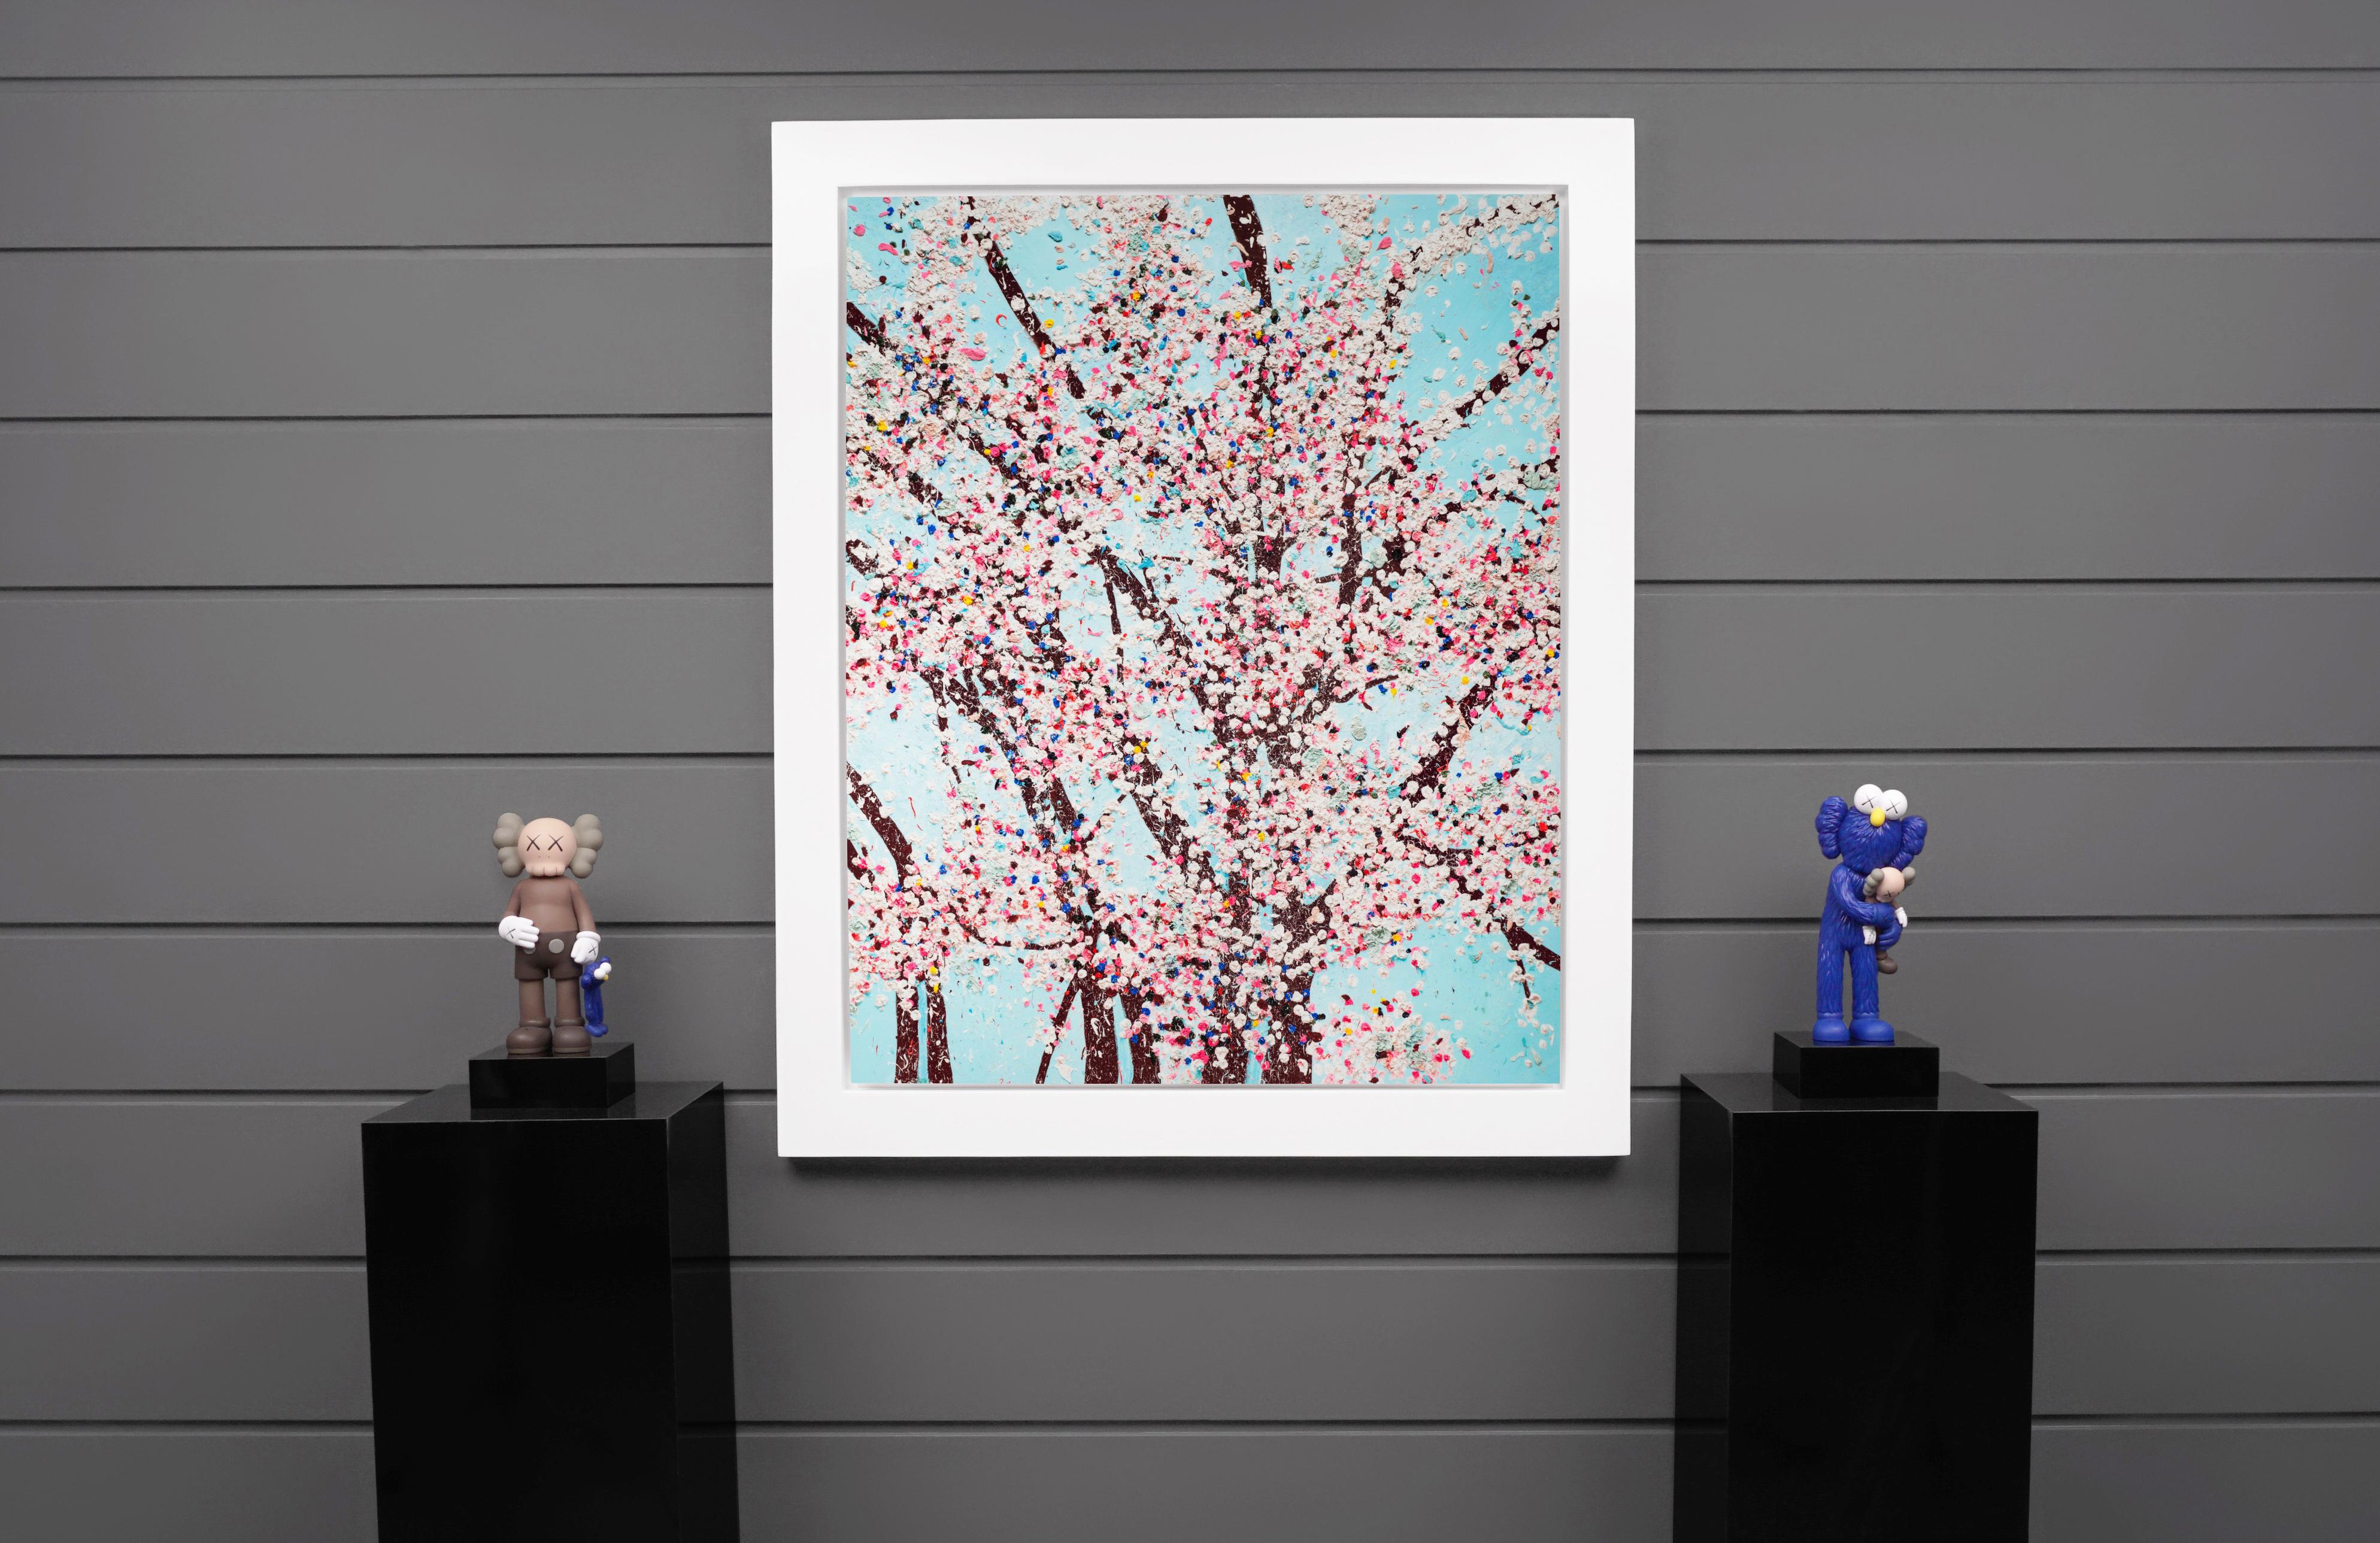 The Virtues 'Mercy', Limited Edition 'Cherry Blossom' Landscape, 2021 - Print by Damien Hirst